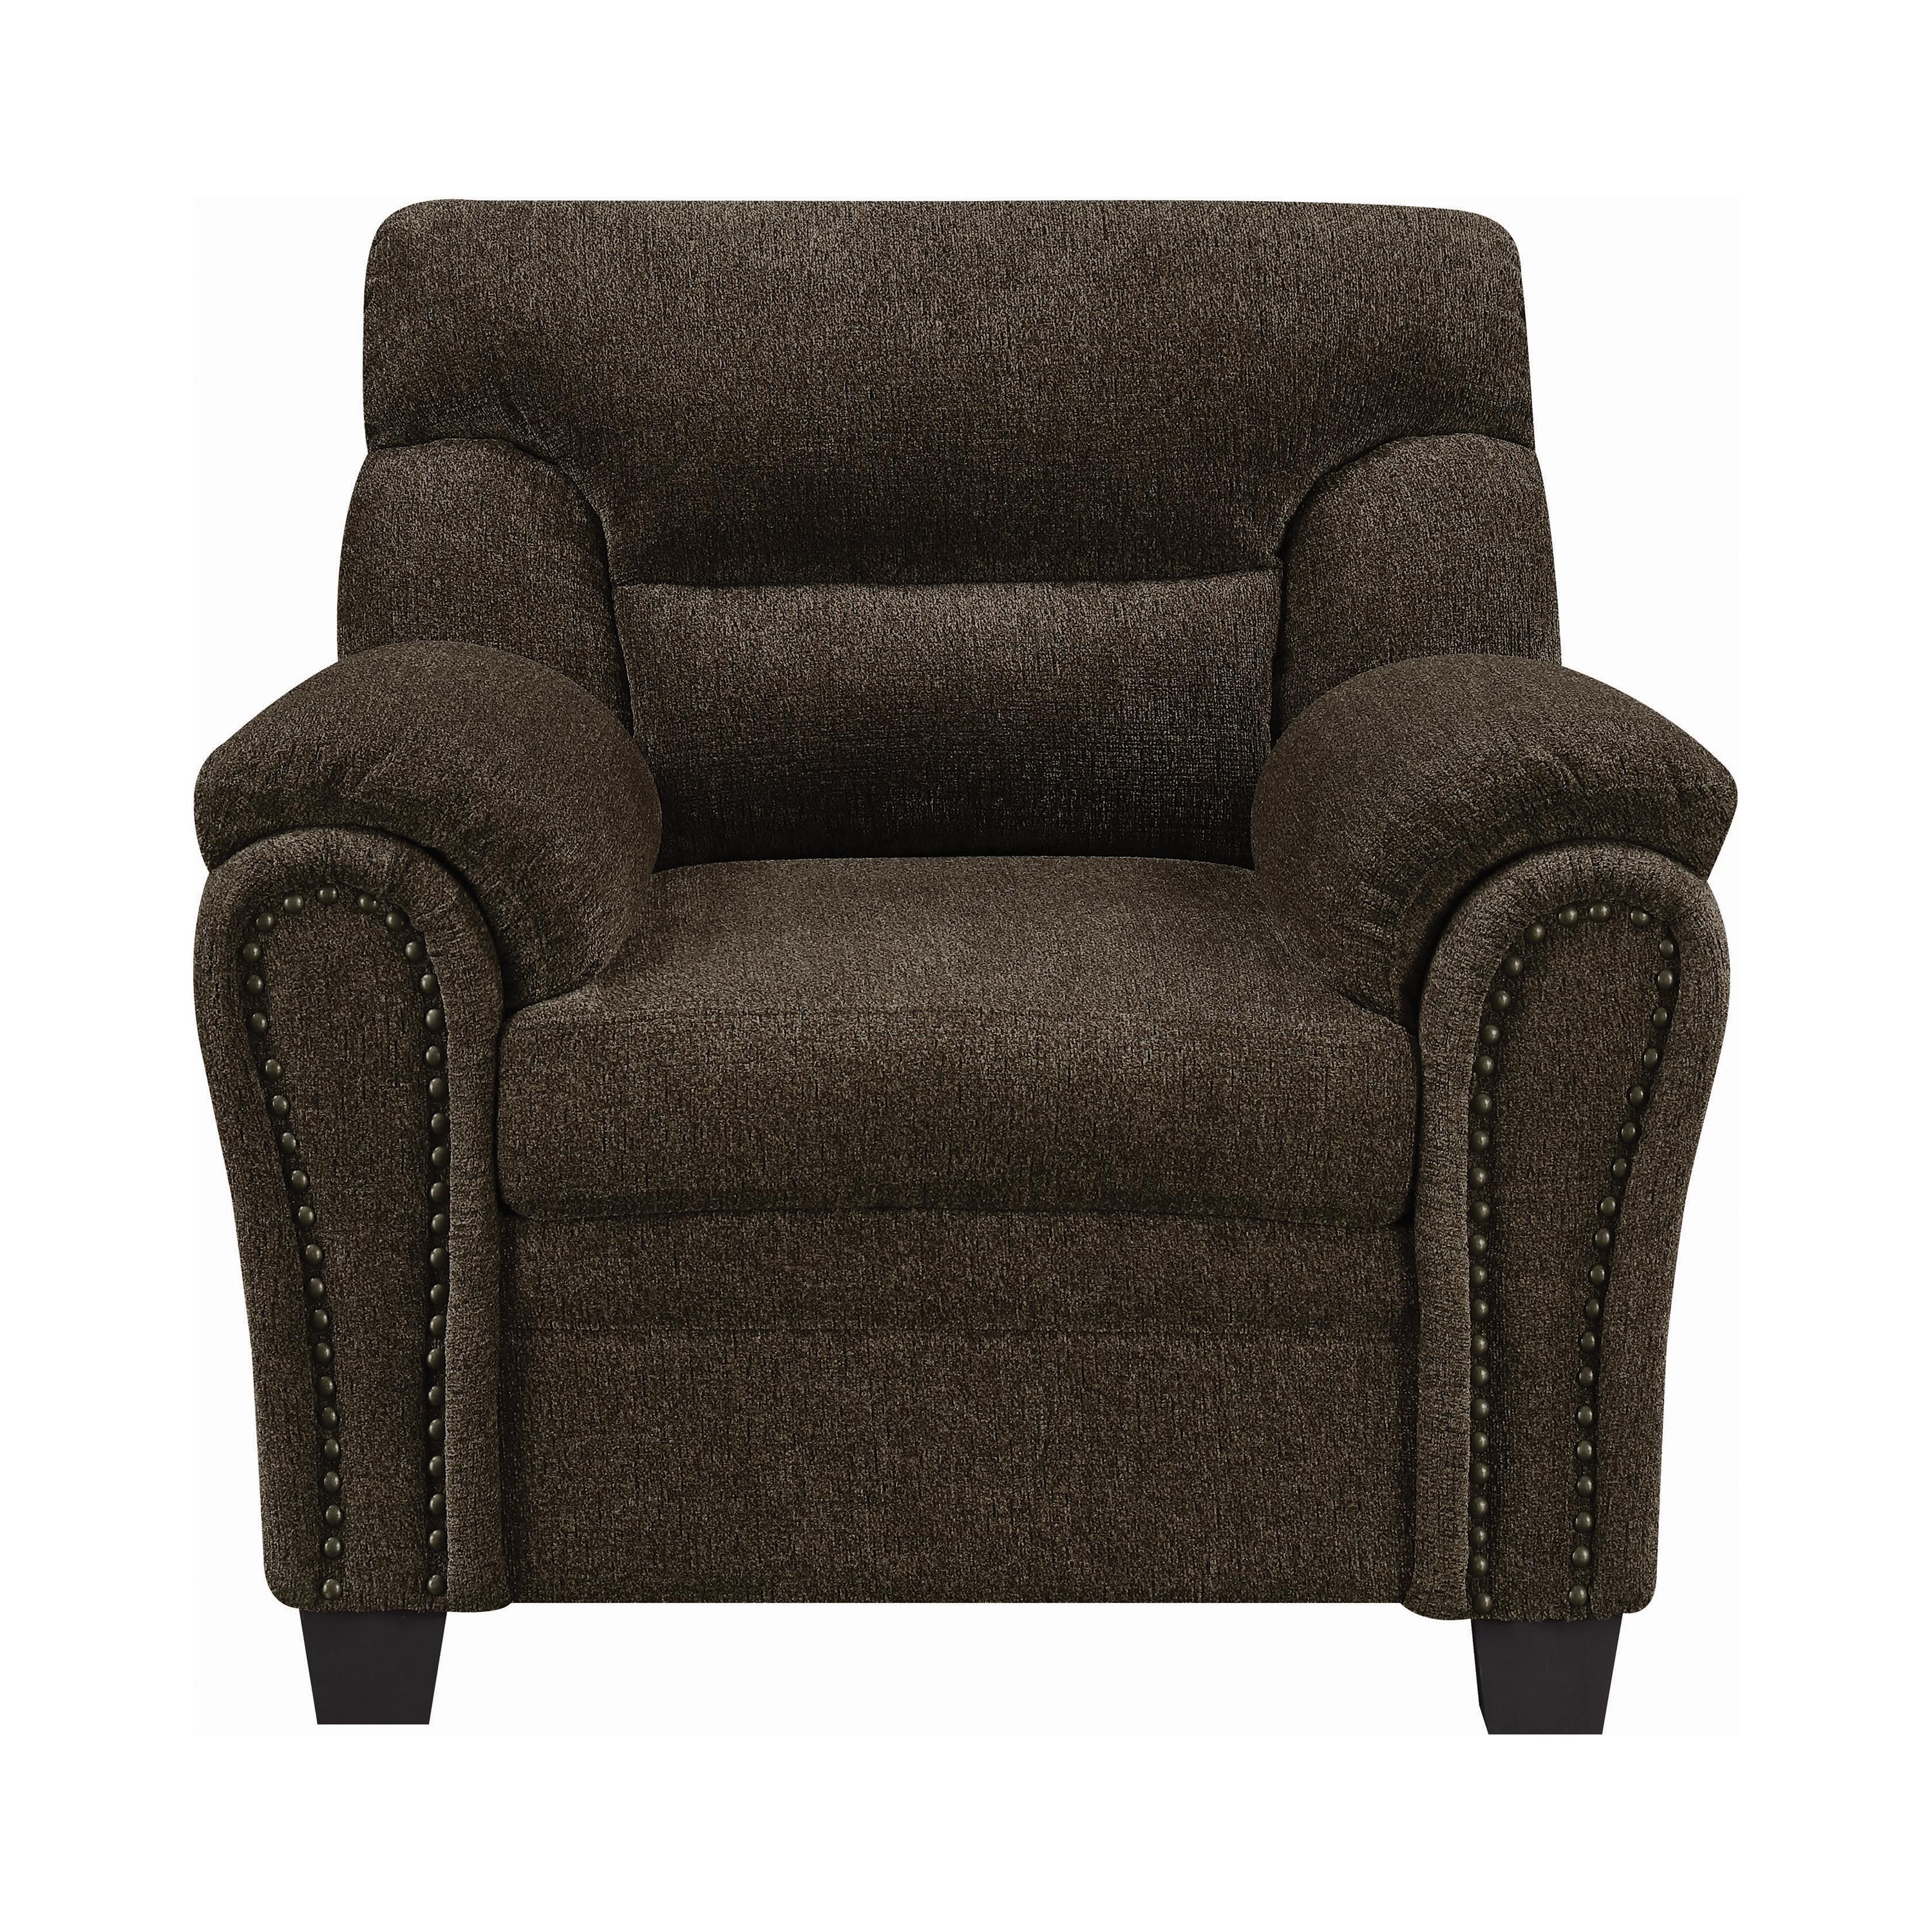 Transitional Arm Chair 506573 Clemintine 506573 in Brown Chenille